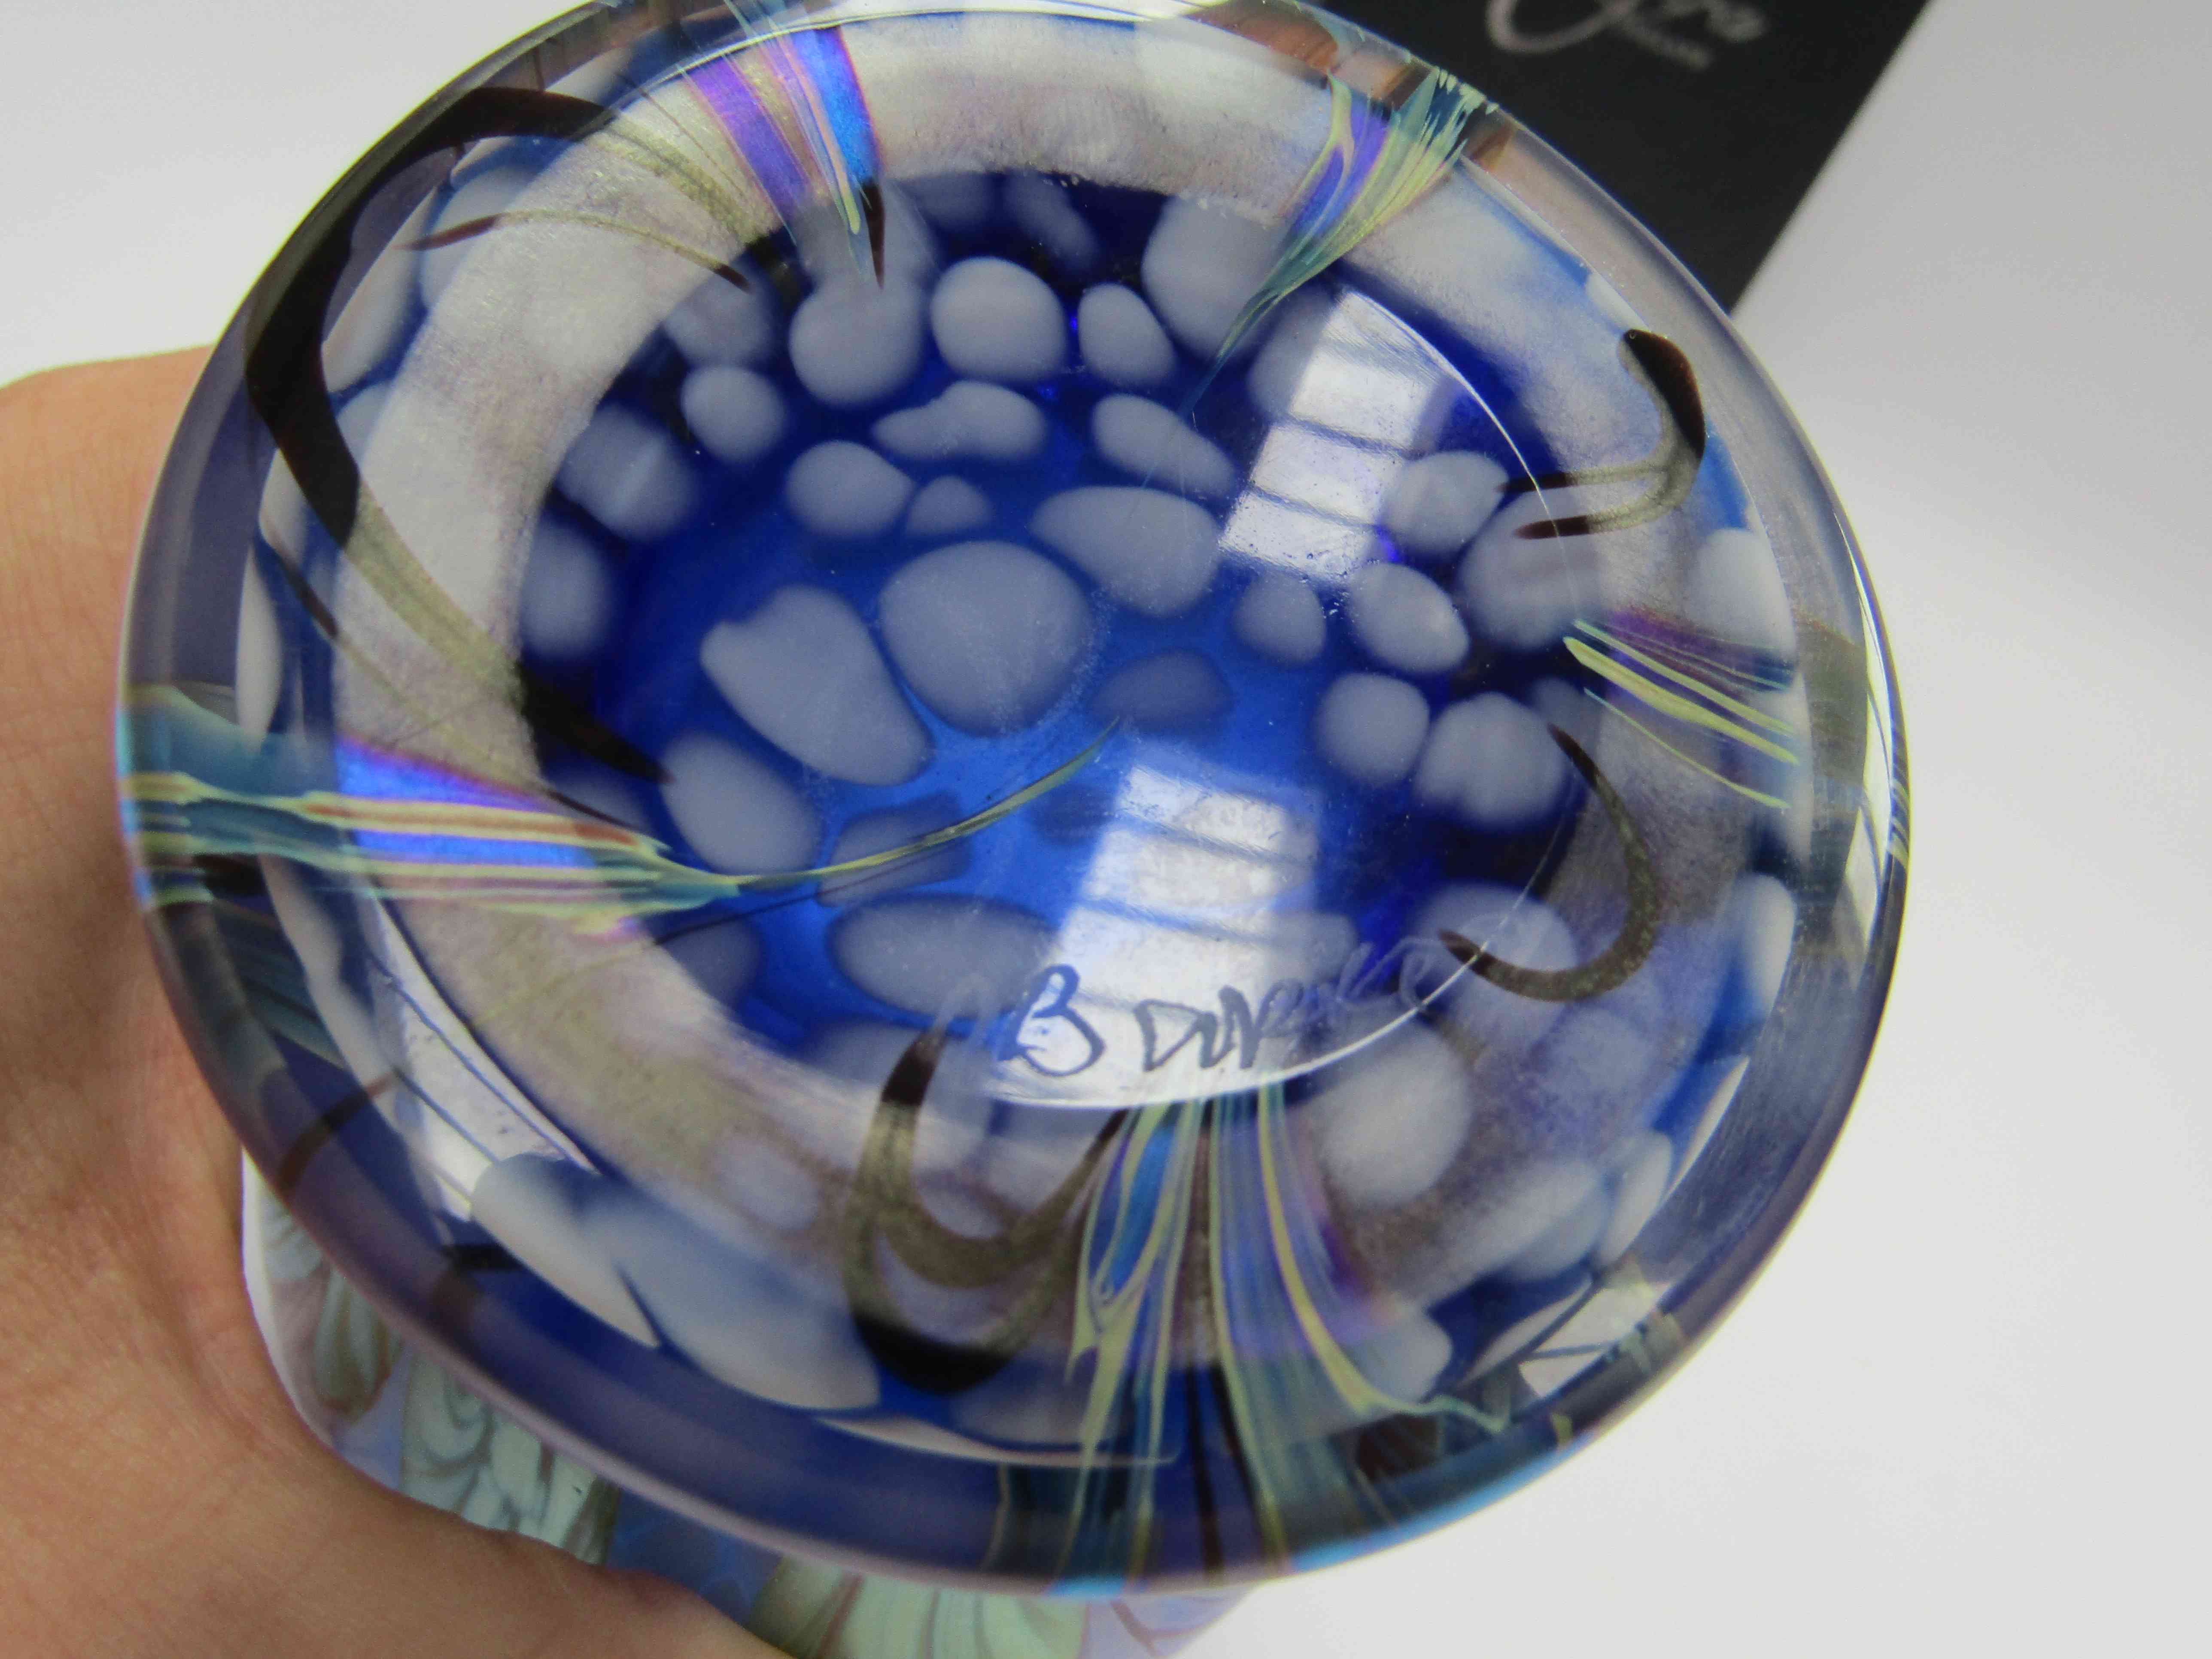 An Okra glass vase designed by Dave Barras, blue with iridescent floral detail. - Image 2 of 2